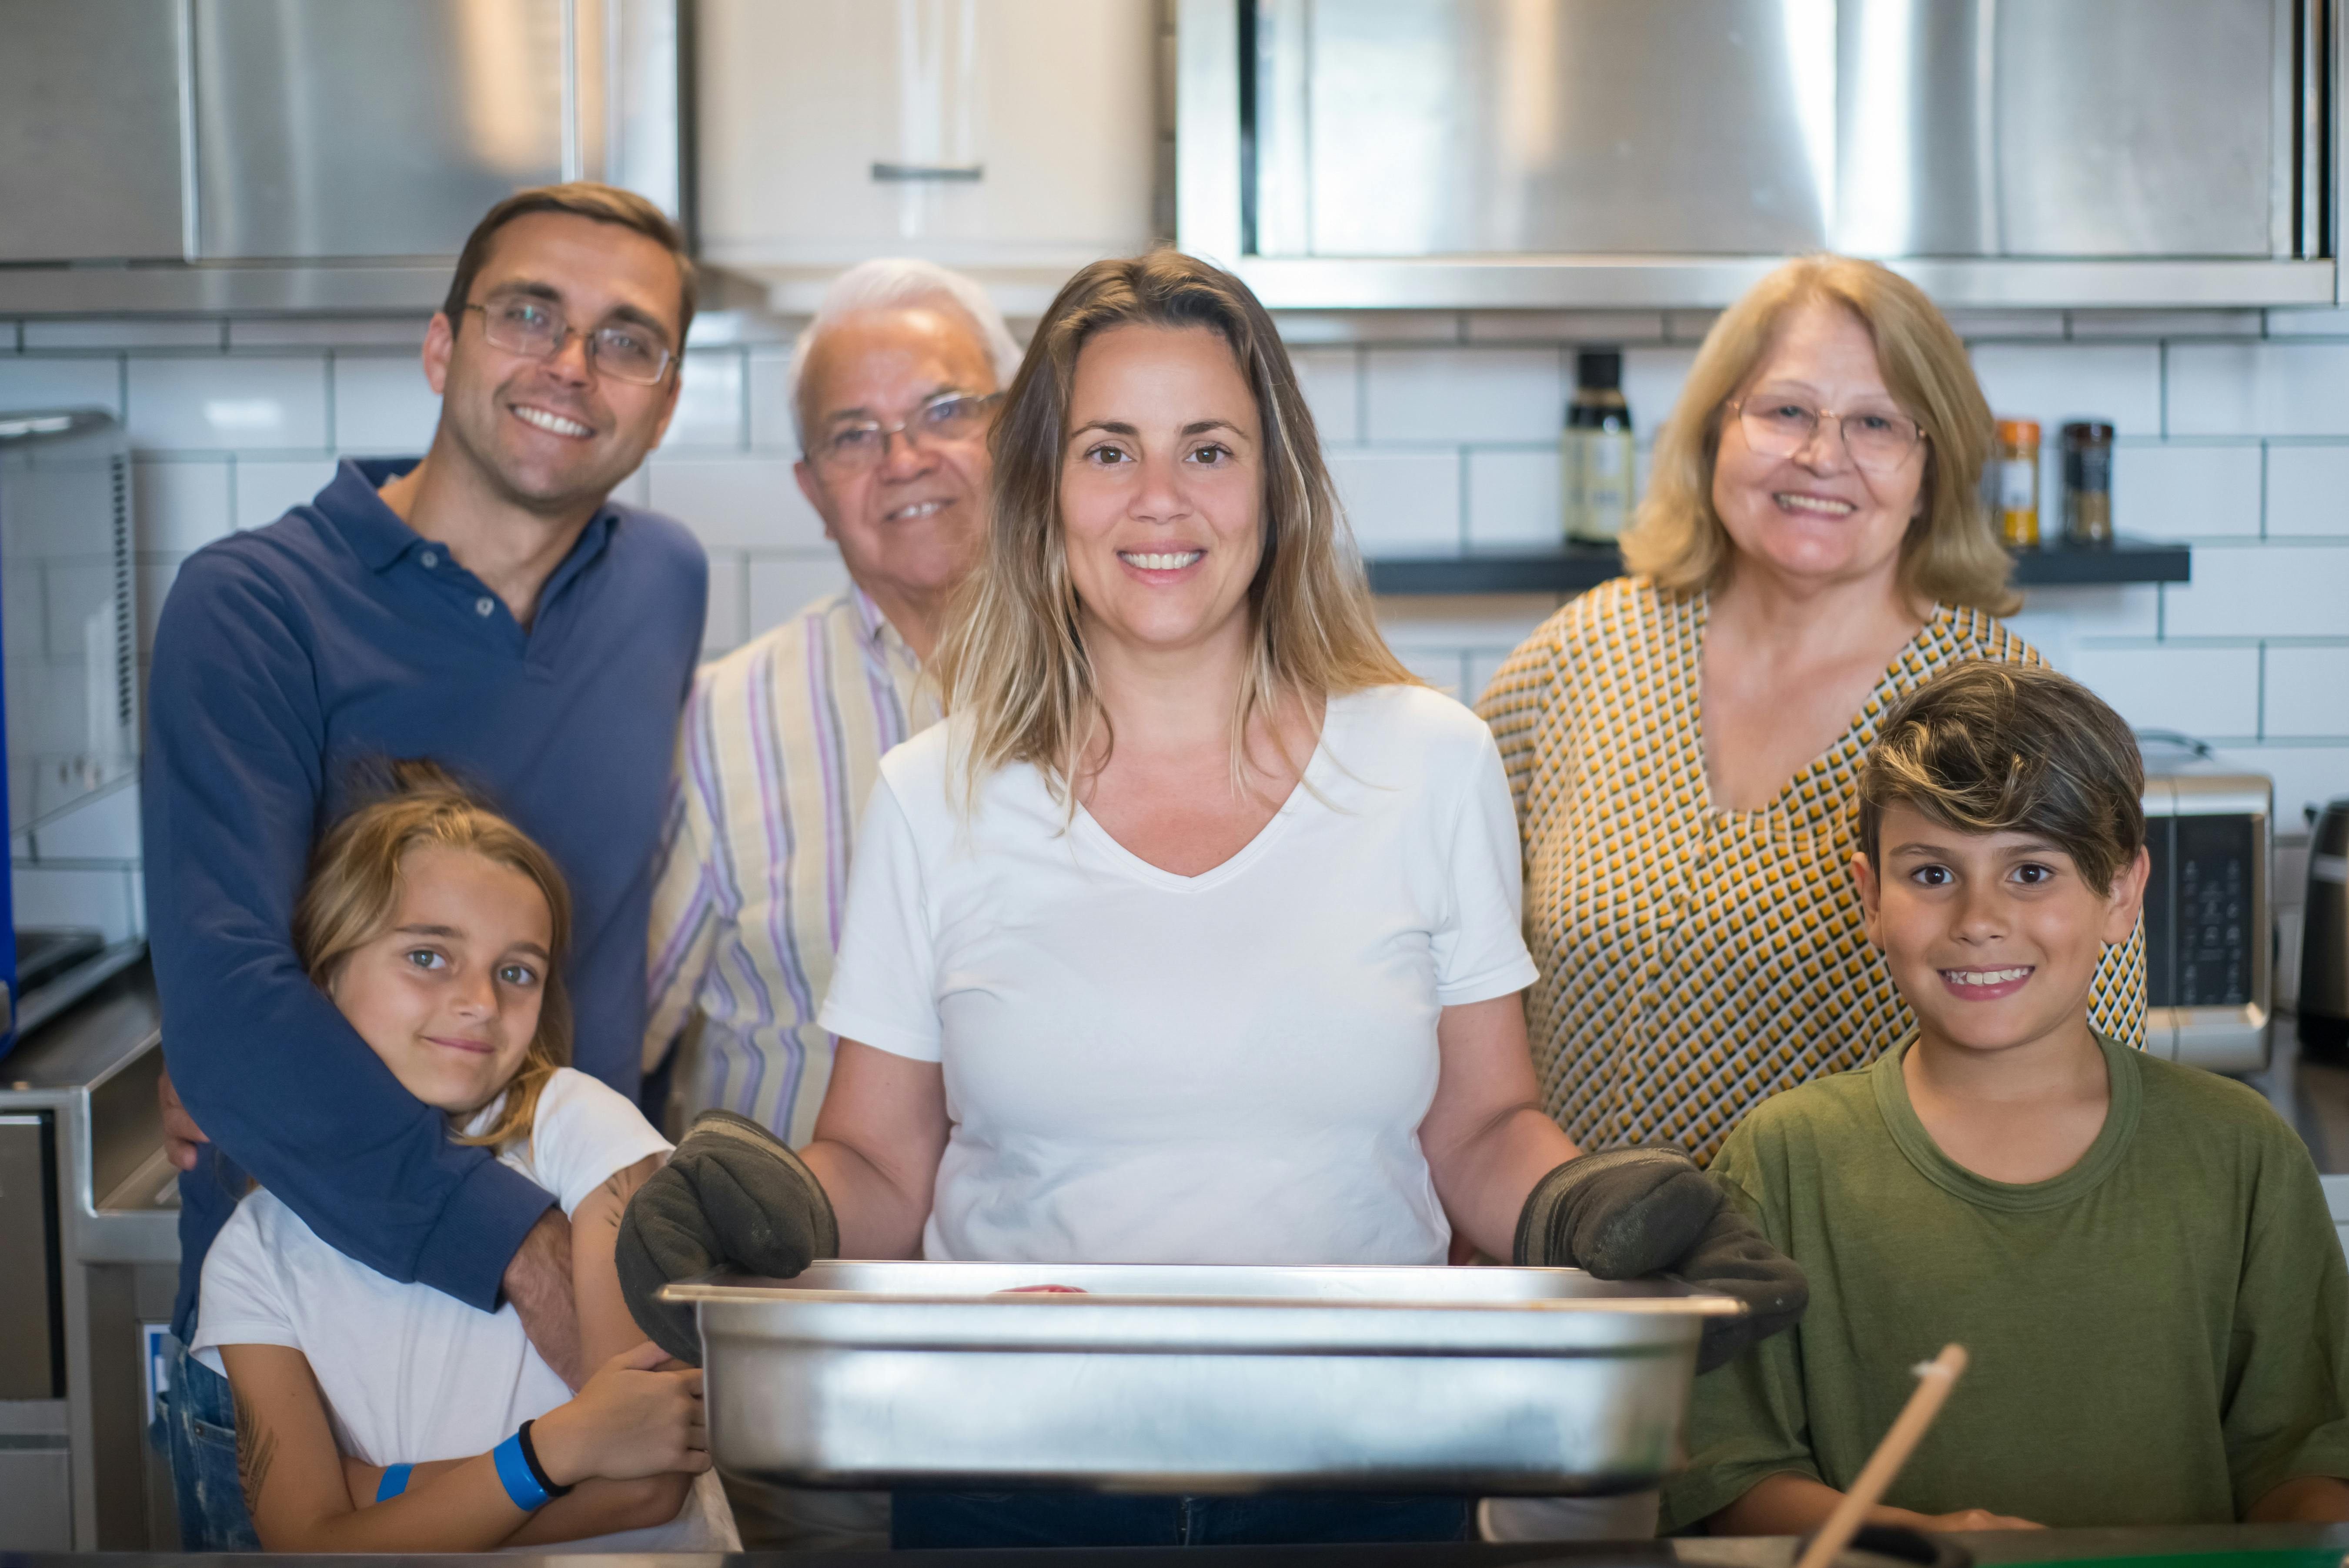 a woman in white shirt smiling while holding a stainless tray near her family